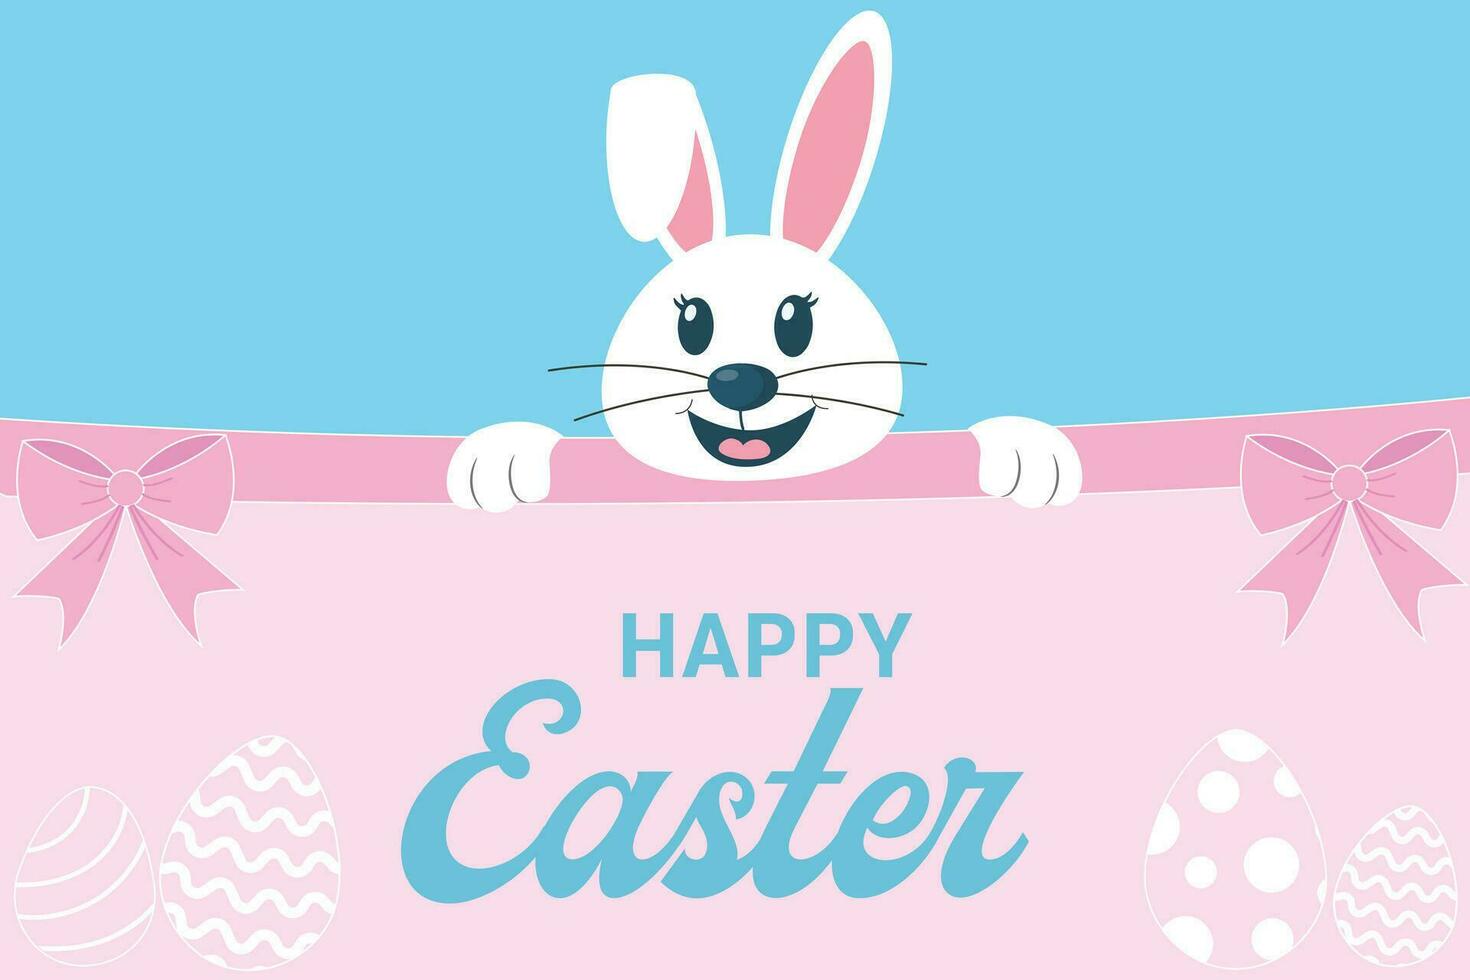 Cute happy easter card with smiling bunny rabbit. Bunnies, Easter eggs, flowers and basket. Spring background, cover, sale banner, flyer design. Template for advertising, web, social media. vector